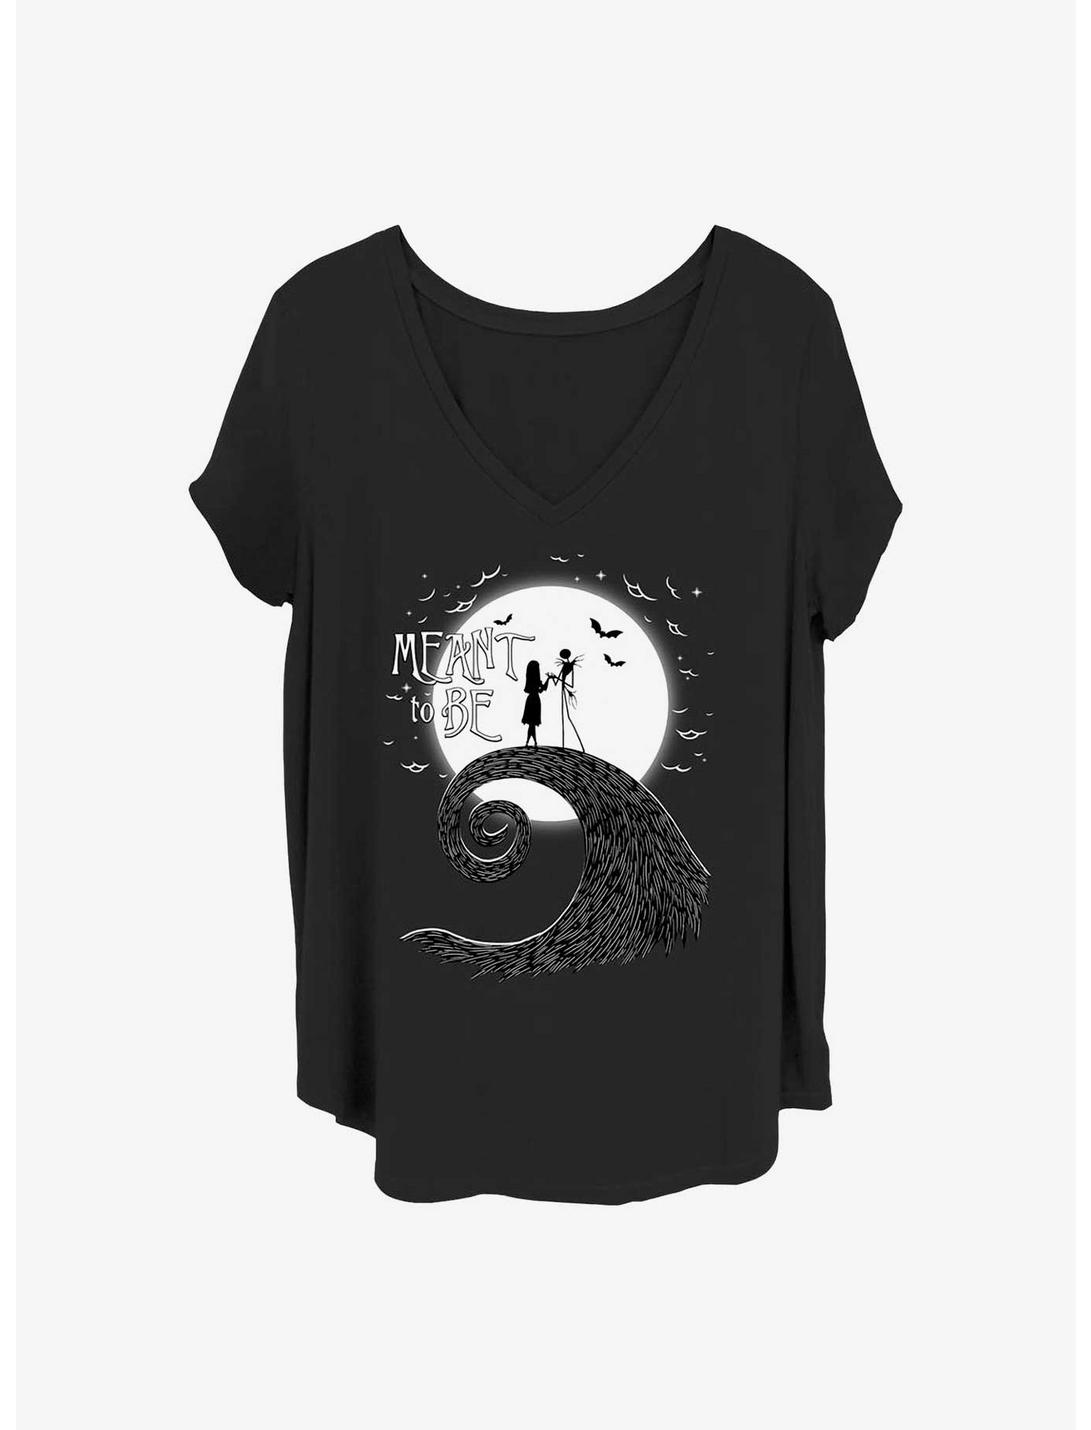 Disney The Nightmare Before Christmas Meant To Be Girls T-Shirt Plus Size, BLACK, hi-res